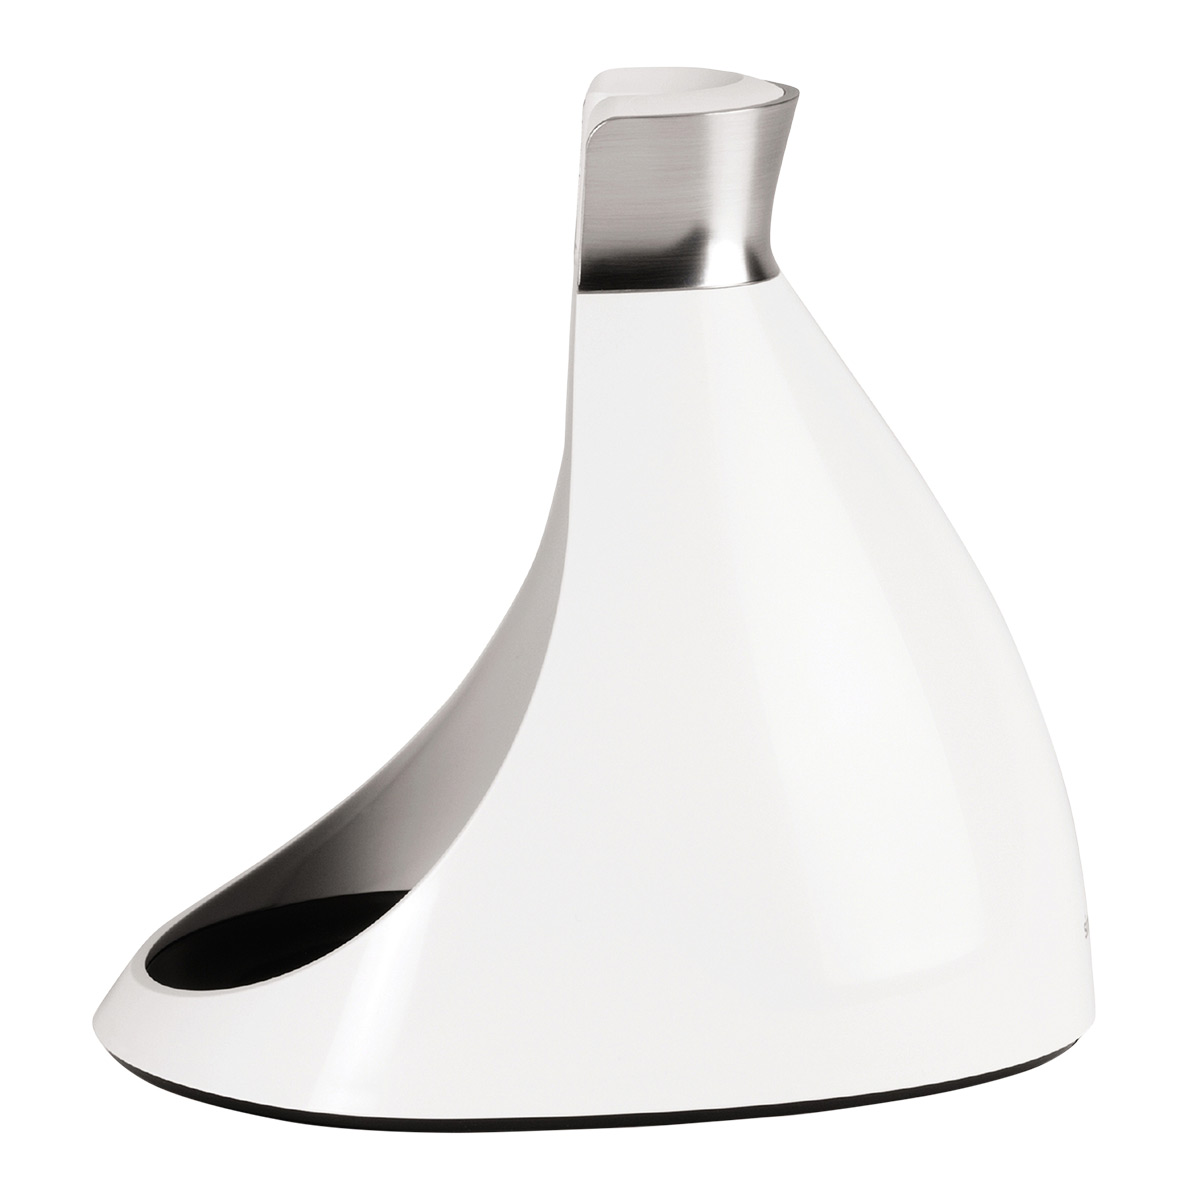 https://www.containerstore.com/catalogimages/393436/10082529-Simple-Human-Plunger-White-.jpg